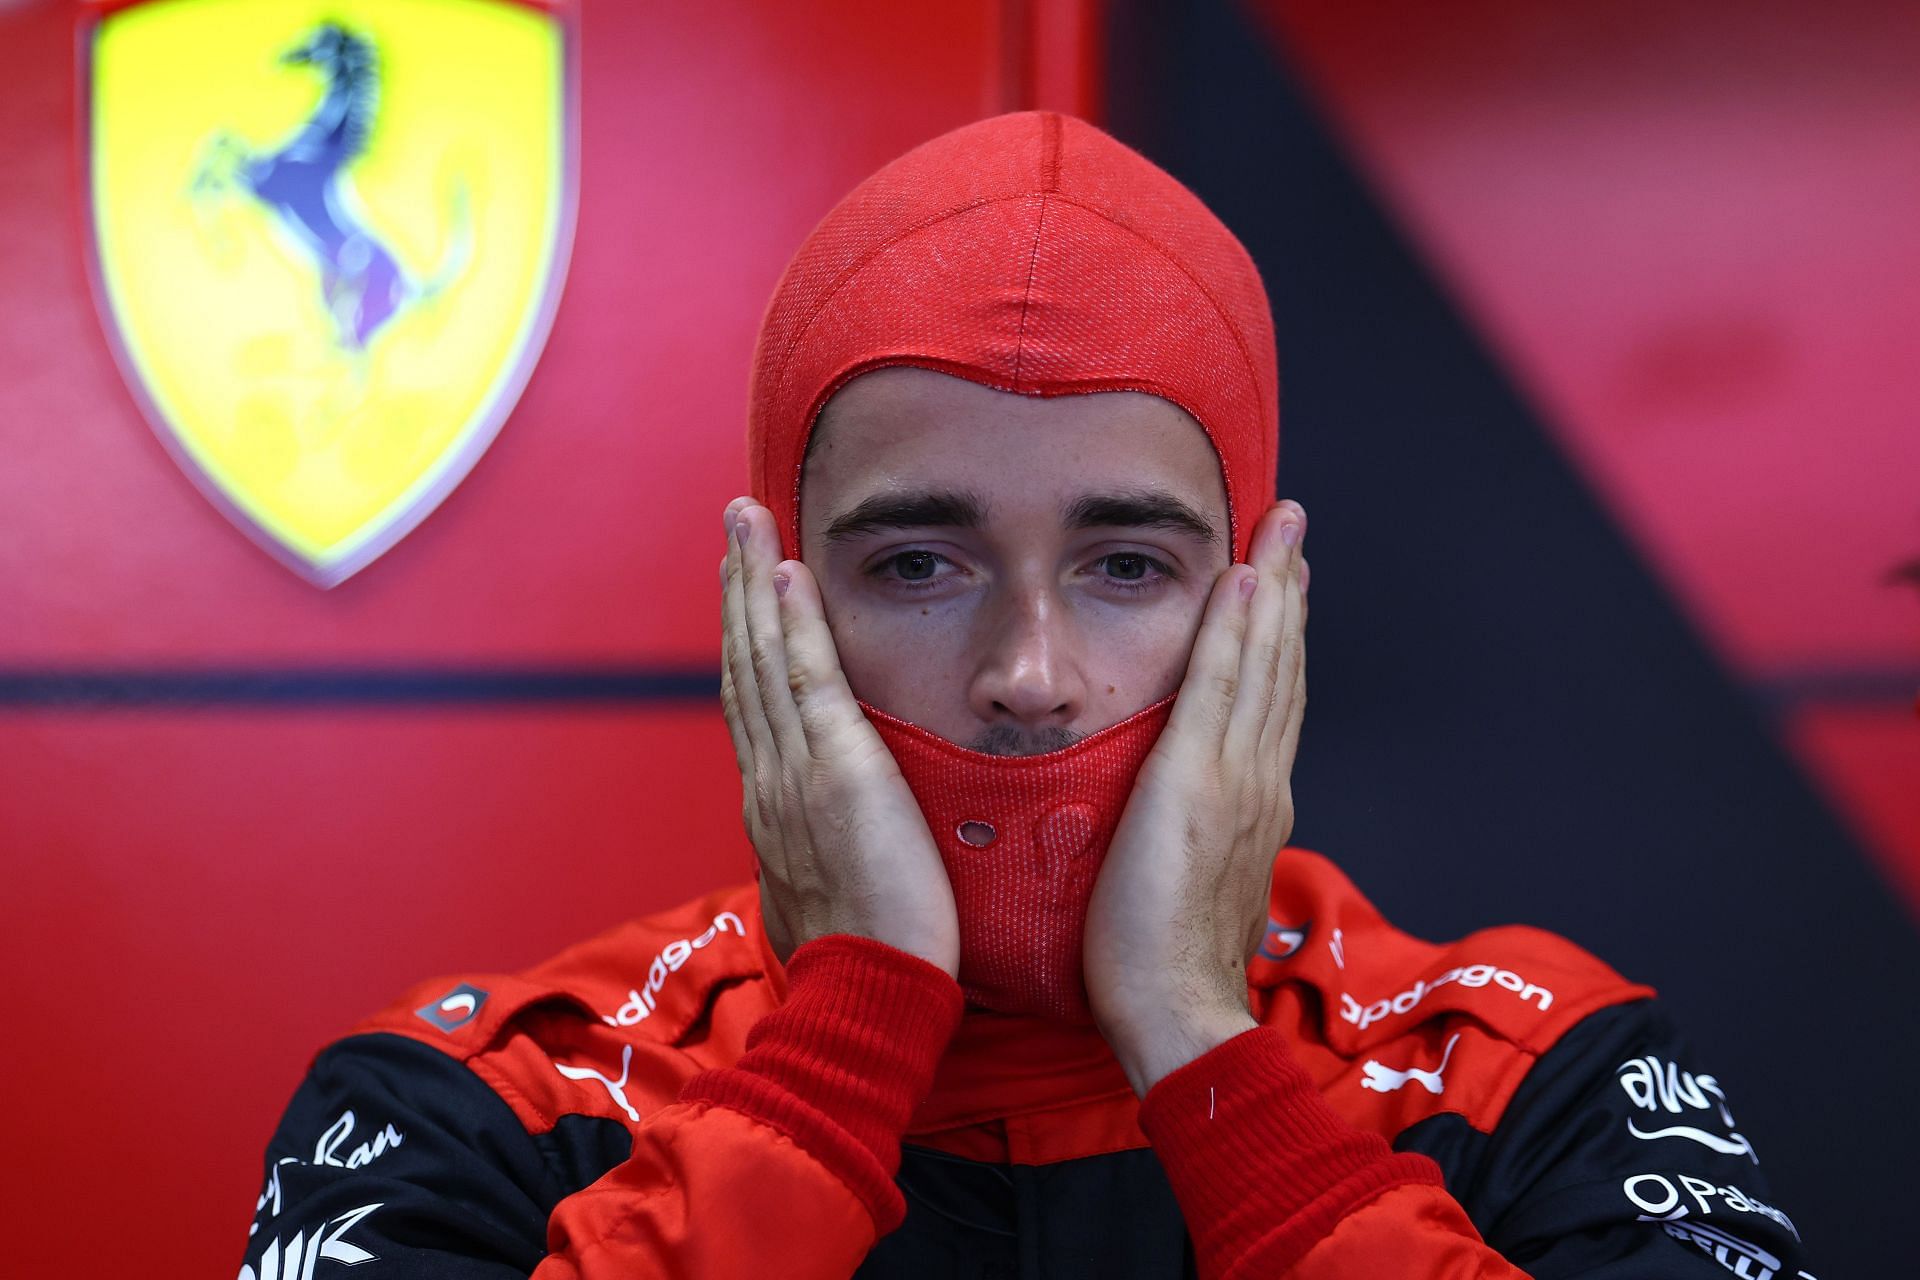 Ferrari driver Charles Leclerc prior to the 2022 F1 Spanish GP in Barcelona. (Photo by Lars Baron/Getty Images)